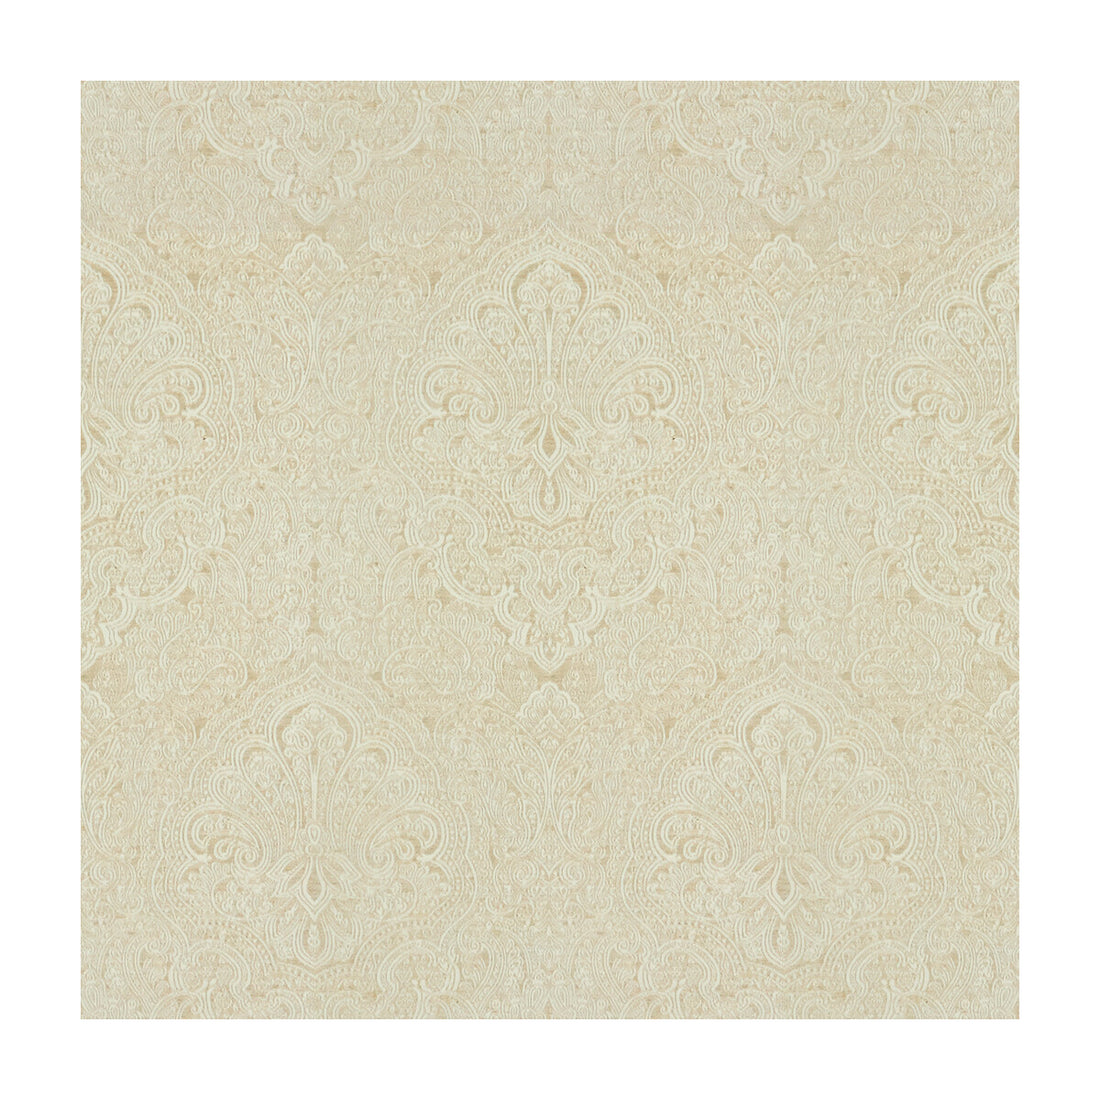 Nahanni fabric in cream color - pattern 34161.101.0 - by Kravet Design in the Candice Olson collection